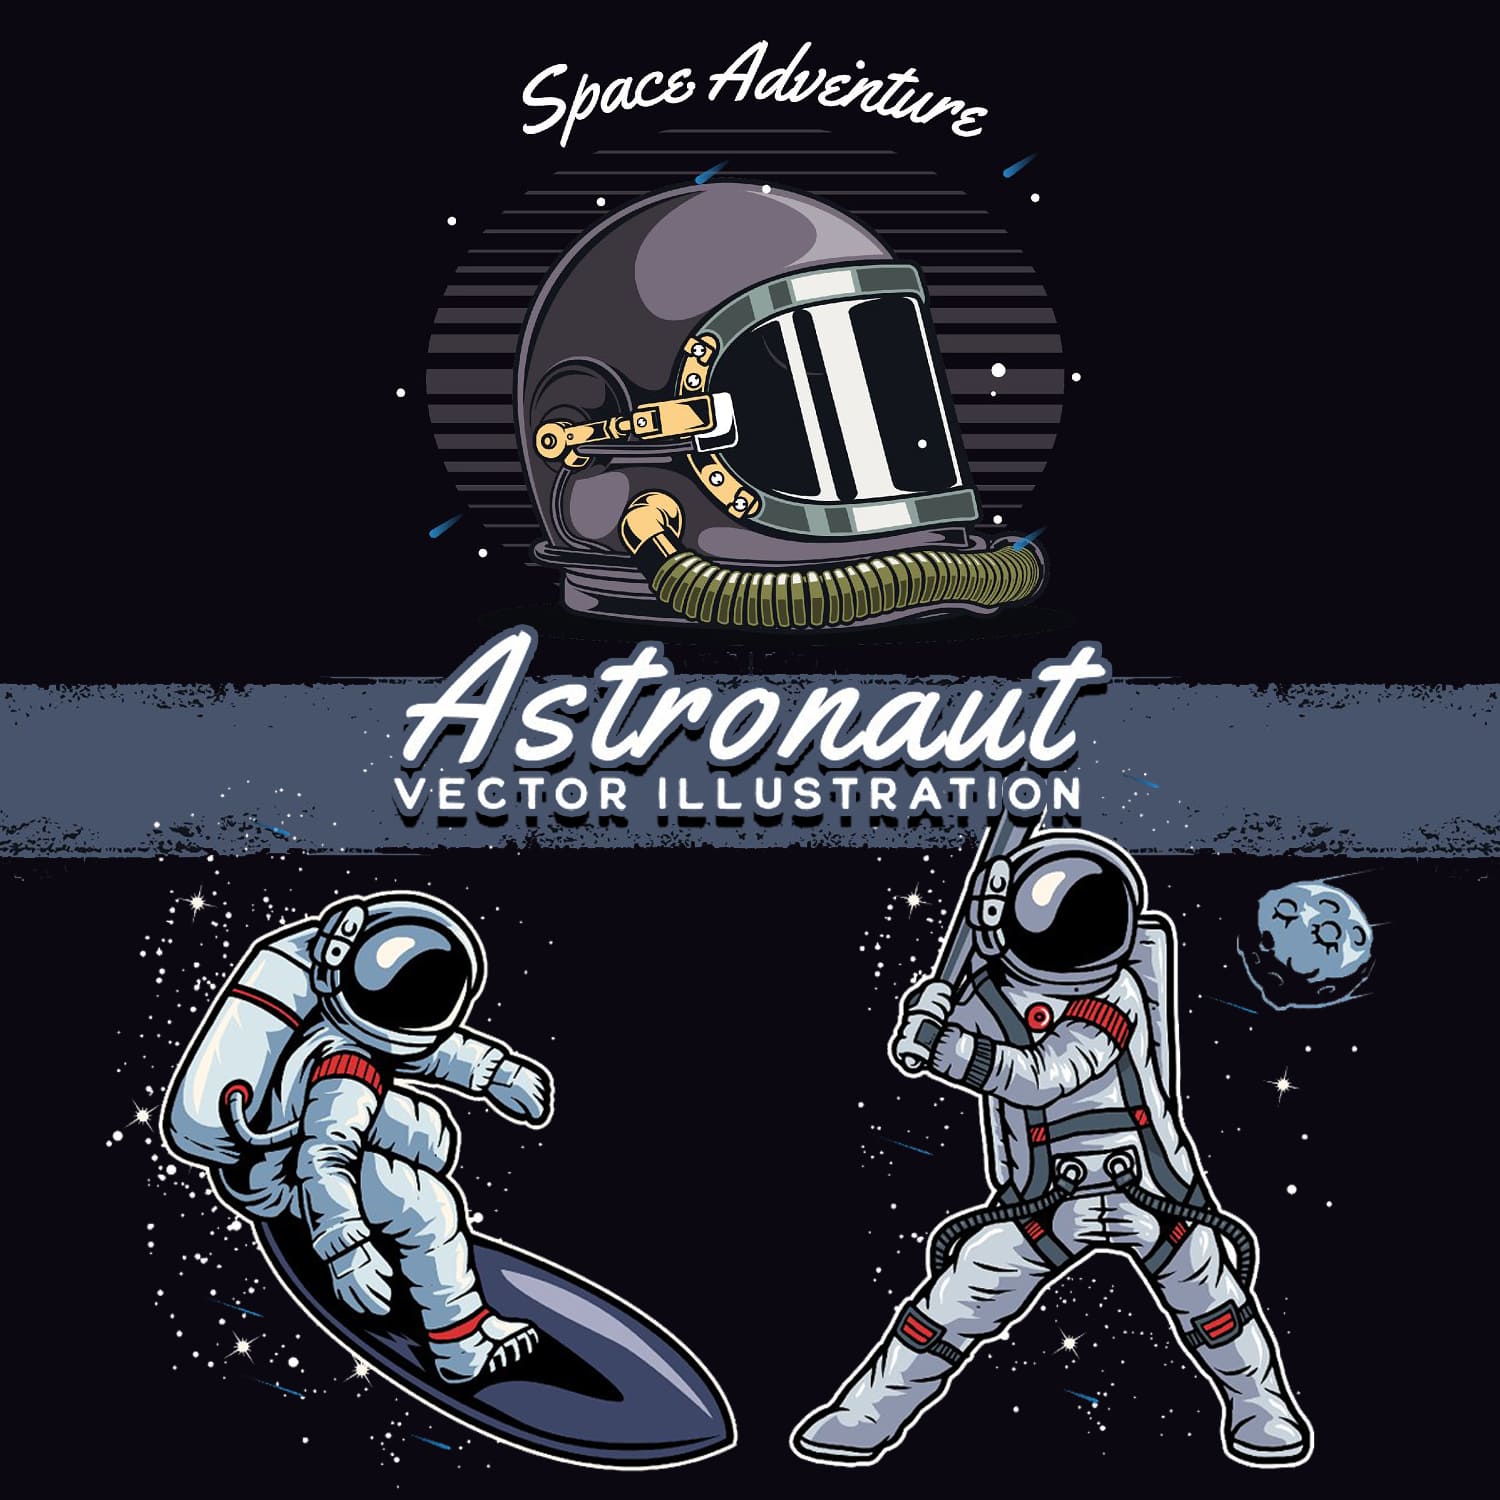 Astronaut Vector Illustration cover image.